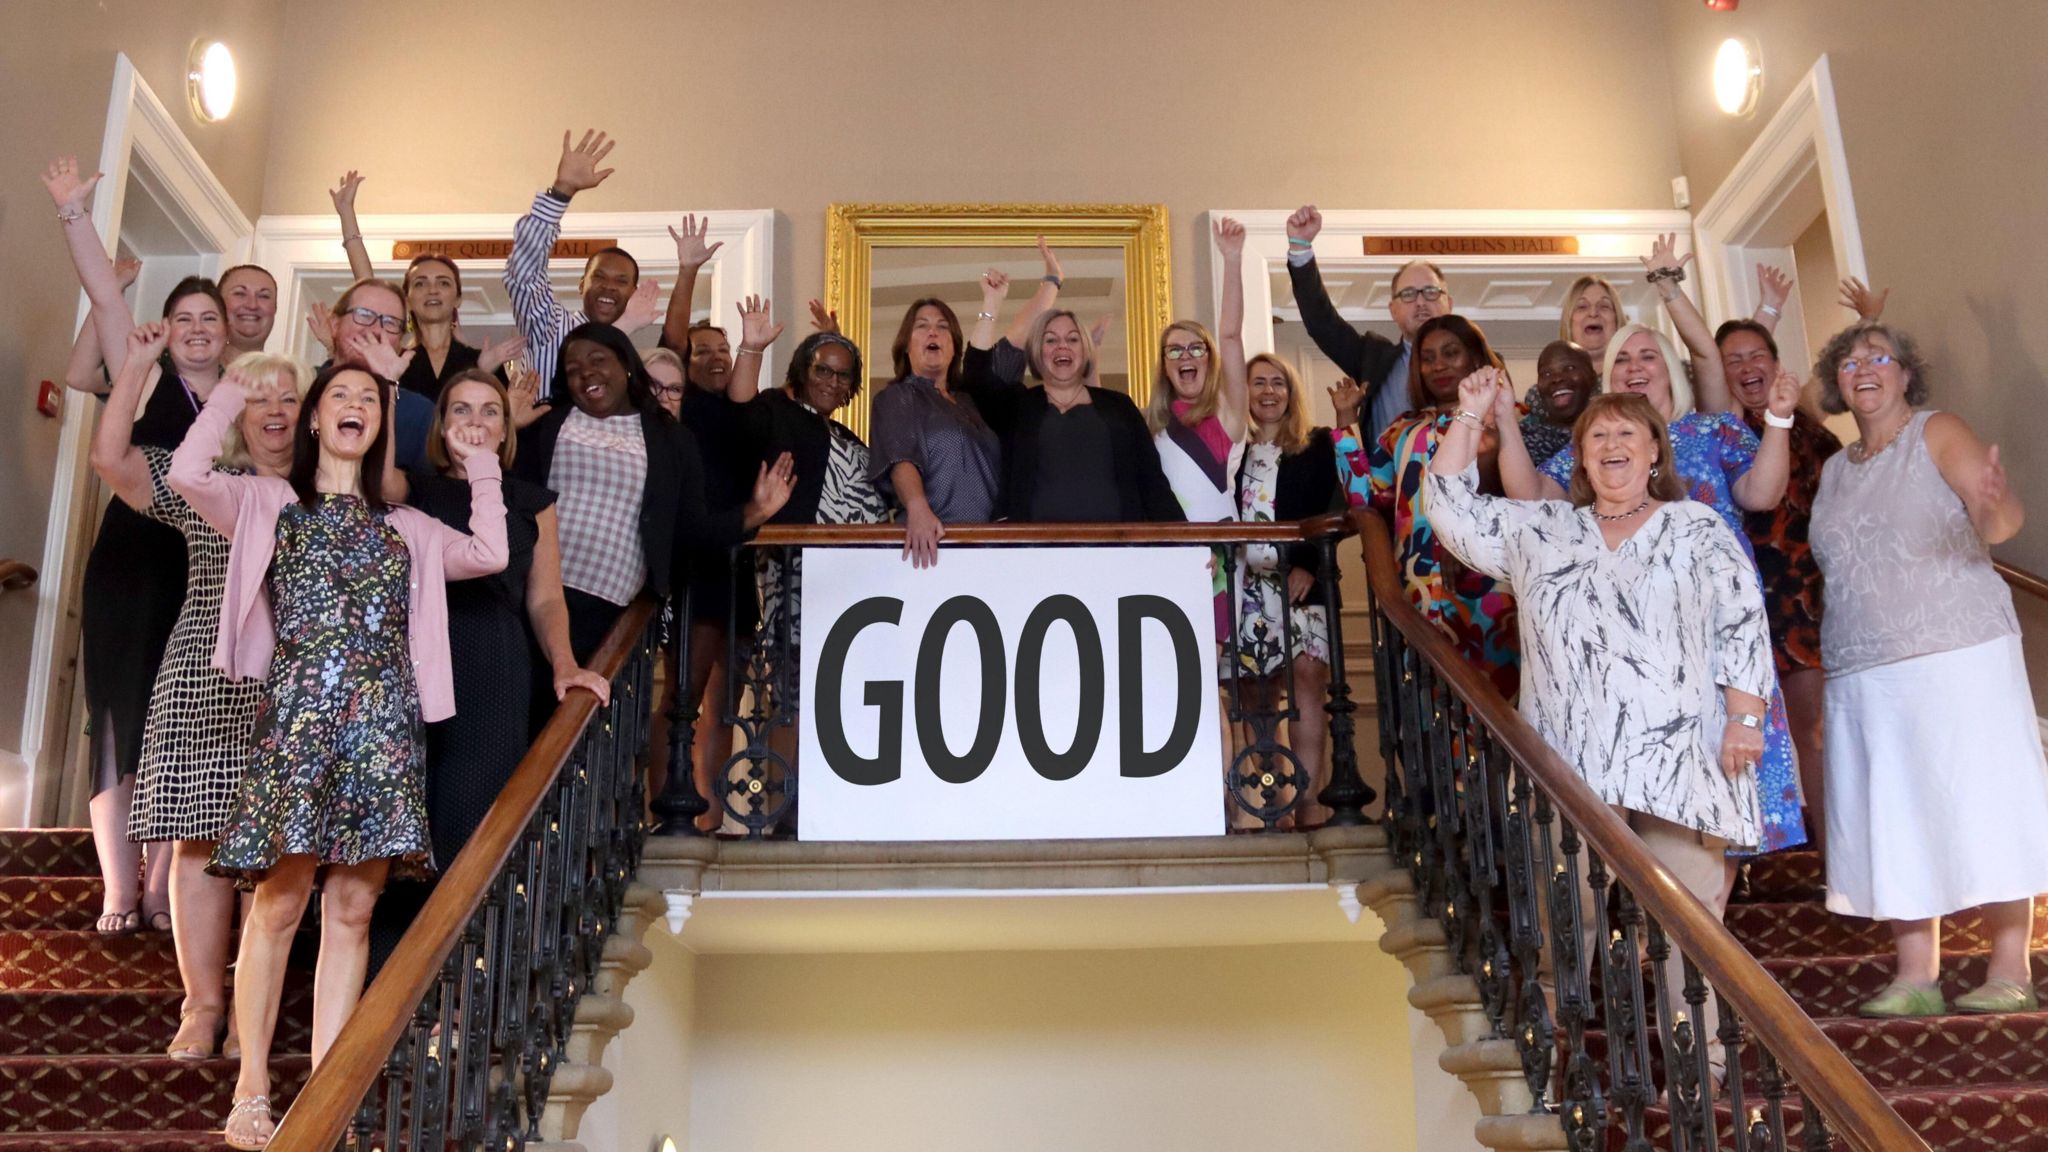 Staff standing on the stairs cheering around a "good" sign